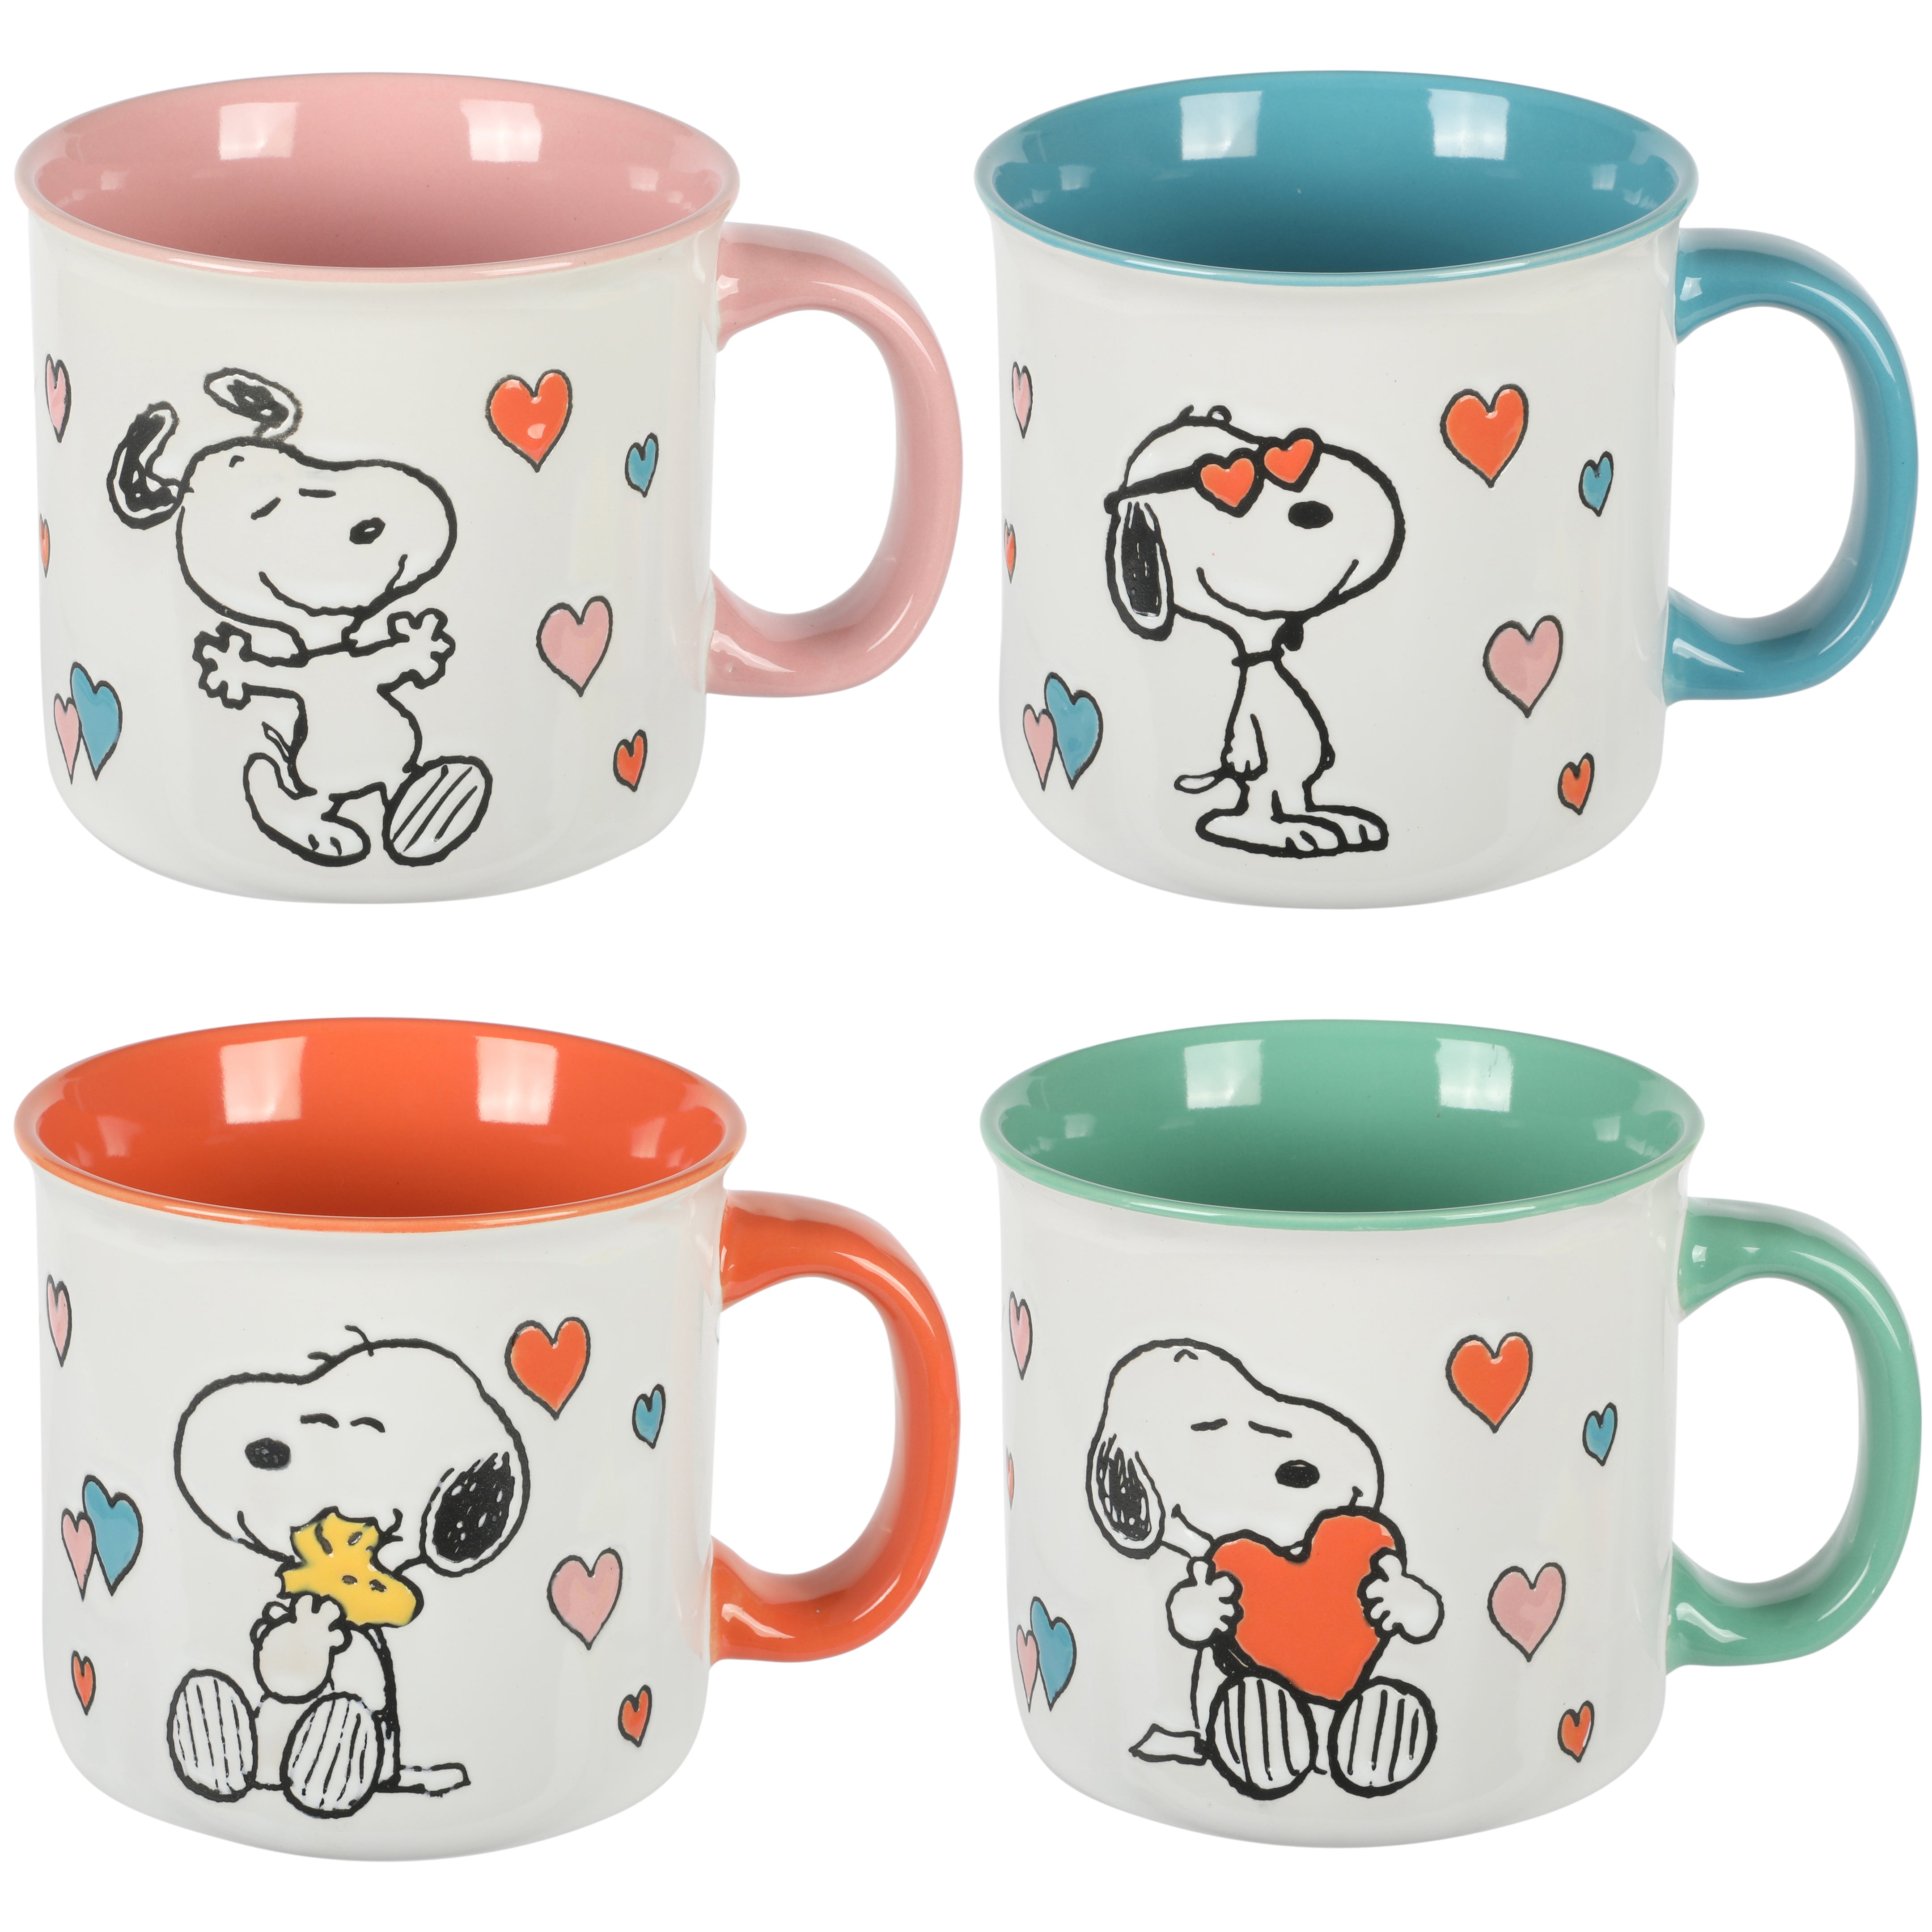 Stackable 11 oz Coffee Cups With Stand Love Designs - Set of 4